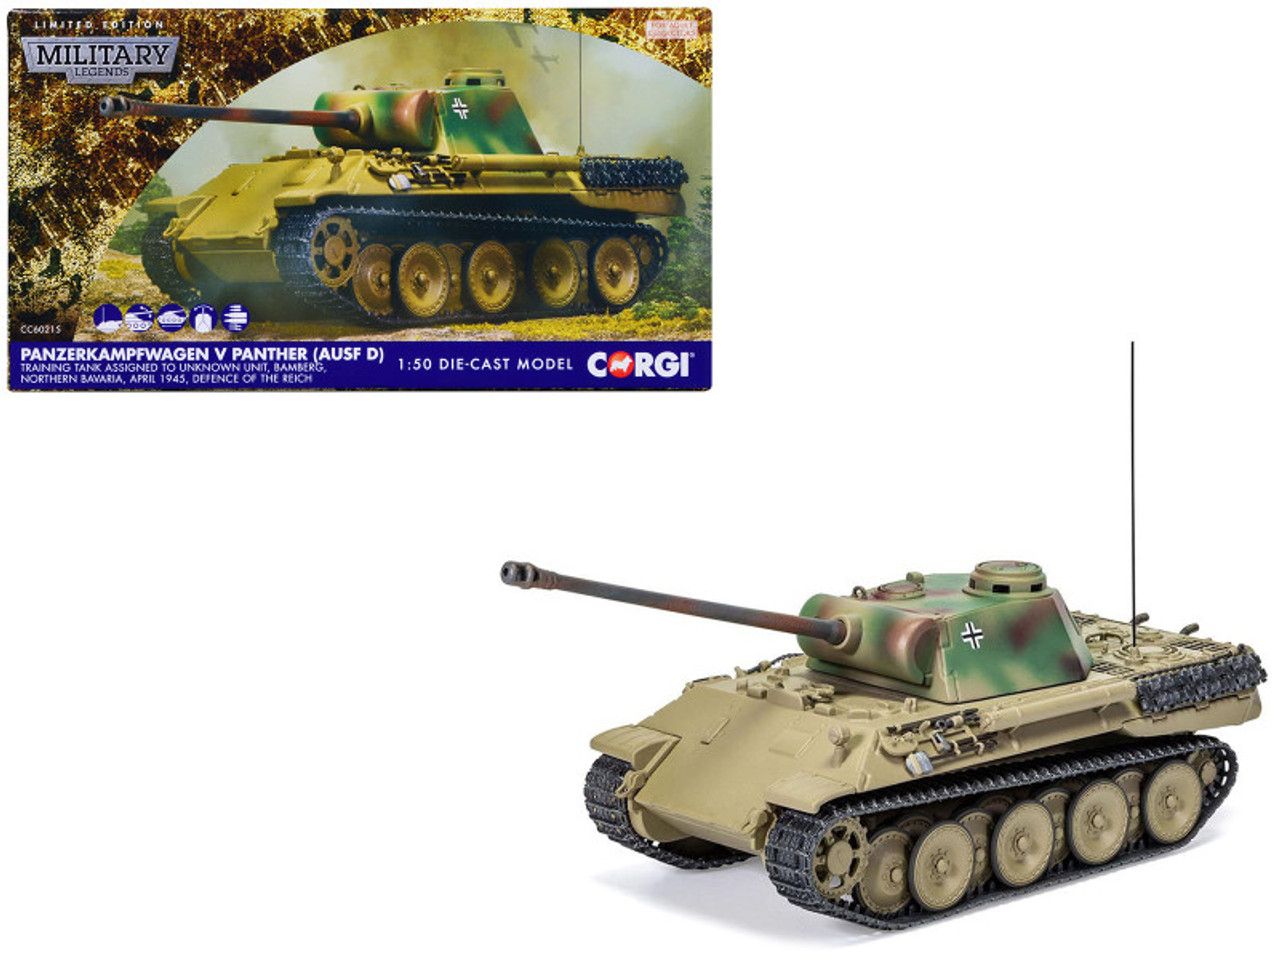 Panzerkampfwagen V Panther (Ausf D) Tank "Training Unit Bamberg North Bavaria Defence of the Reich" (1945) German Army "Military Legends" Series 1/50 Diecast Model by Corgi